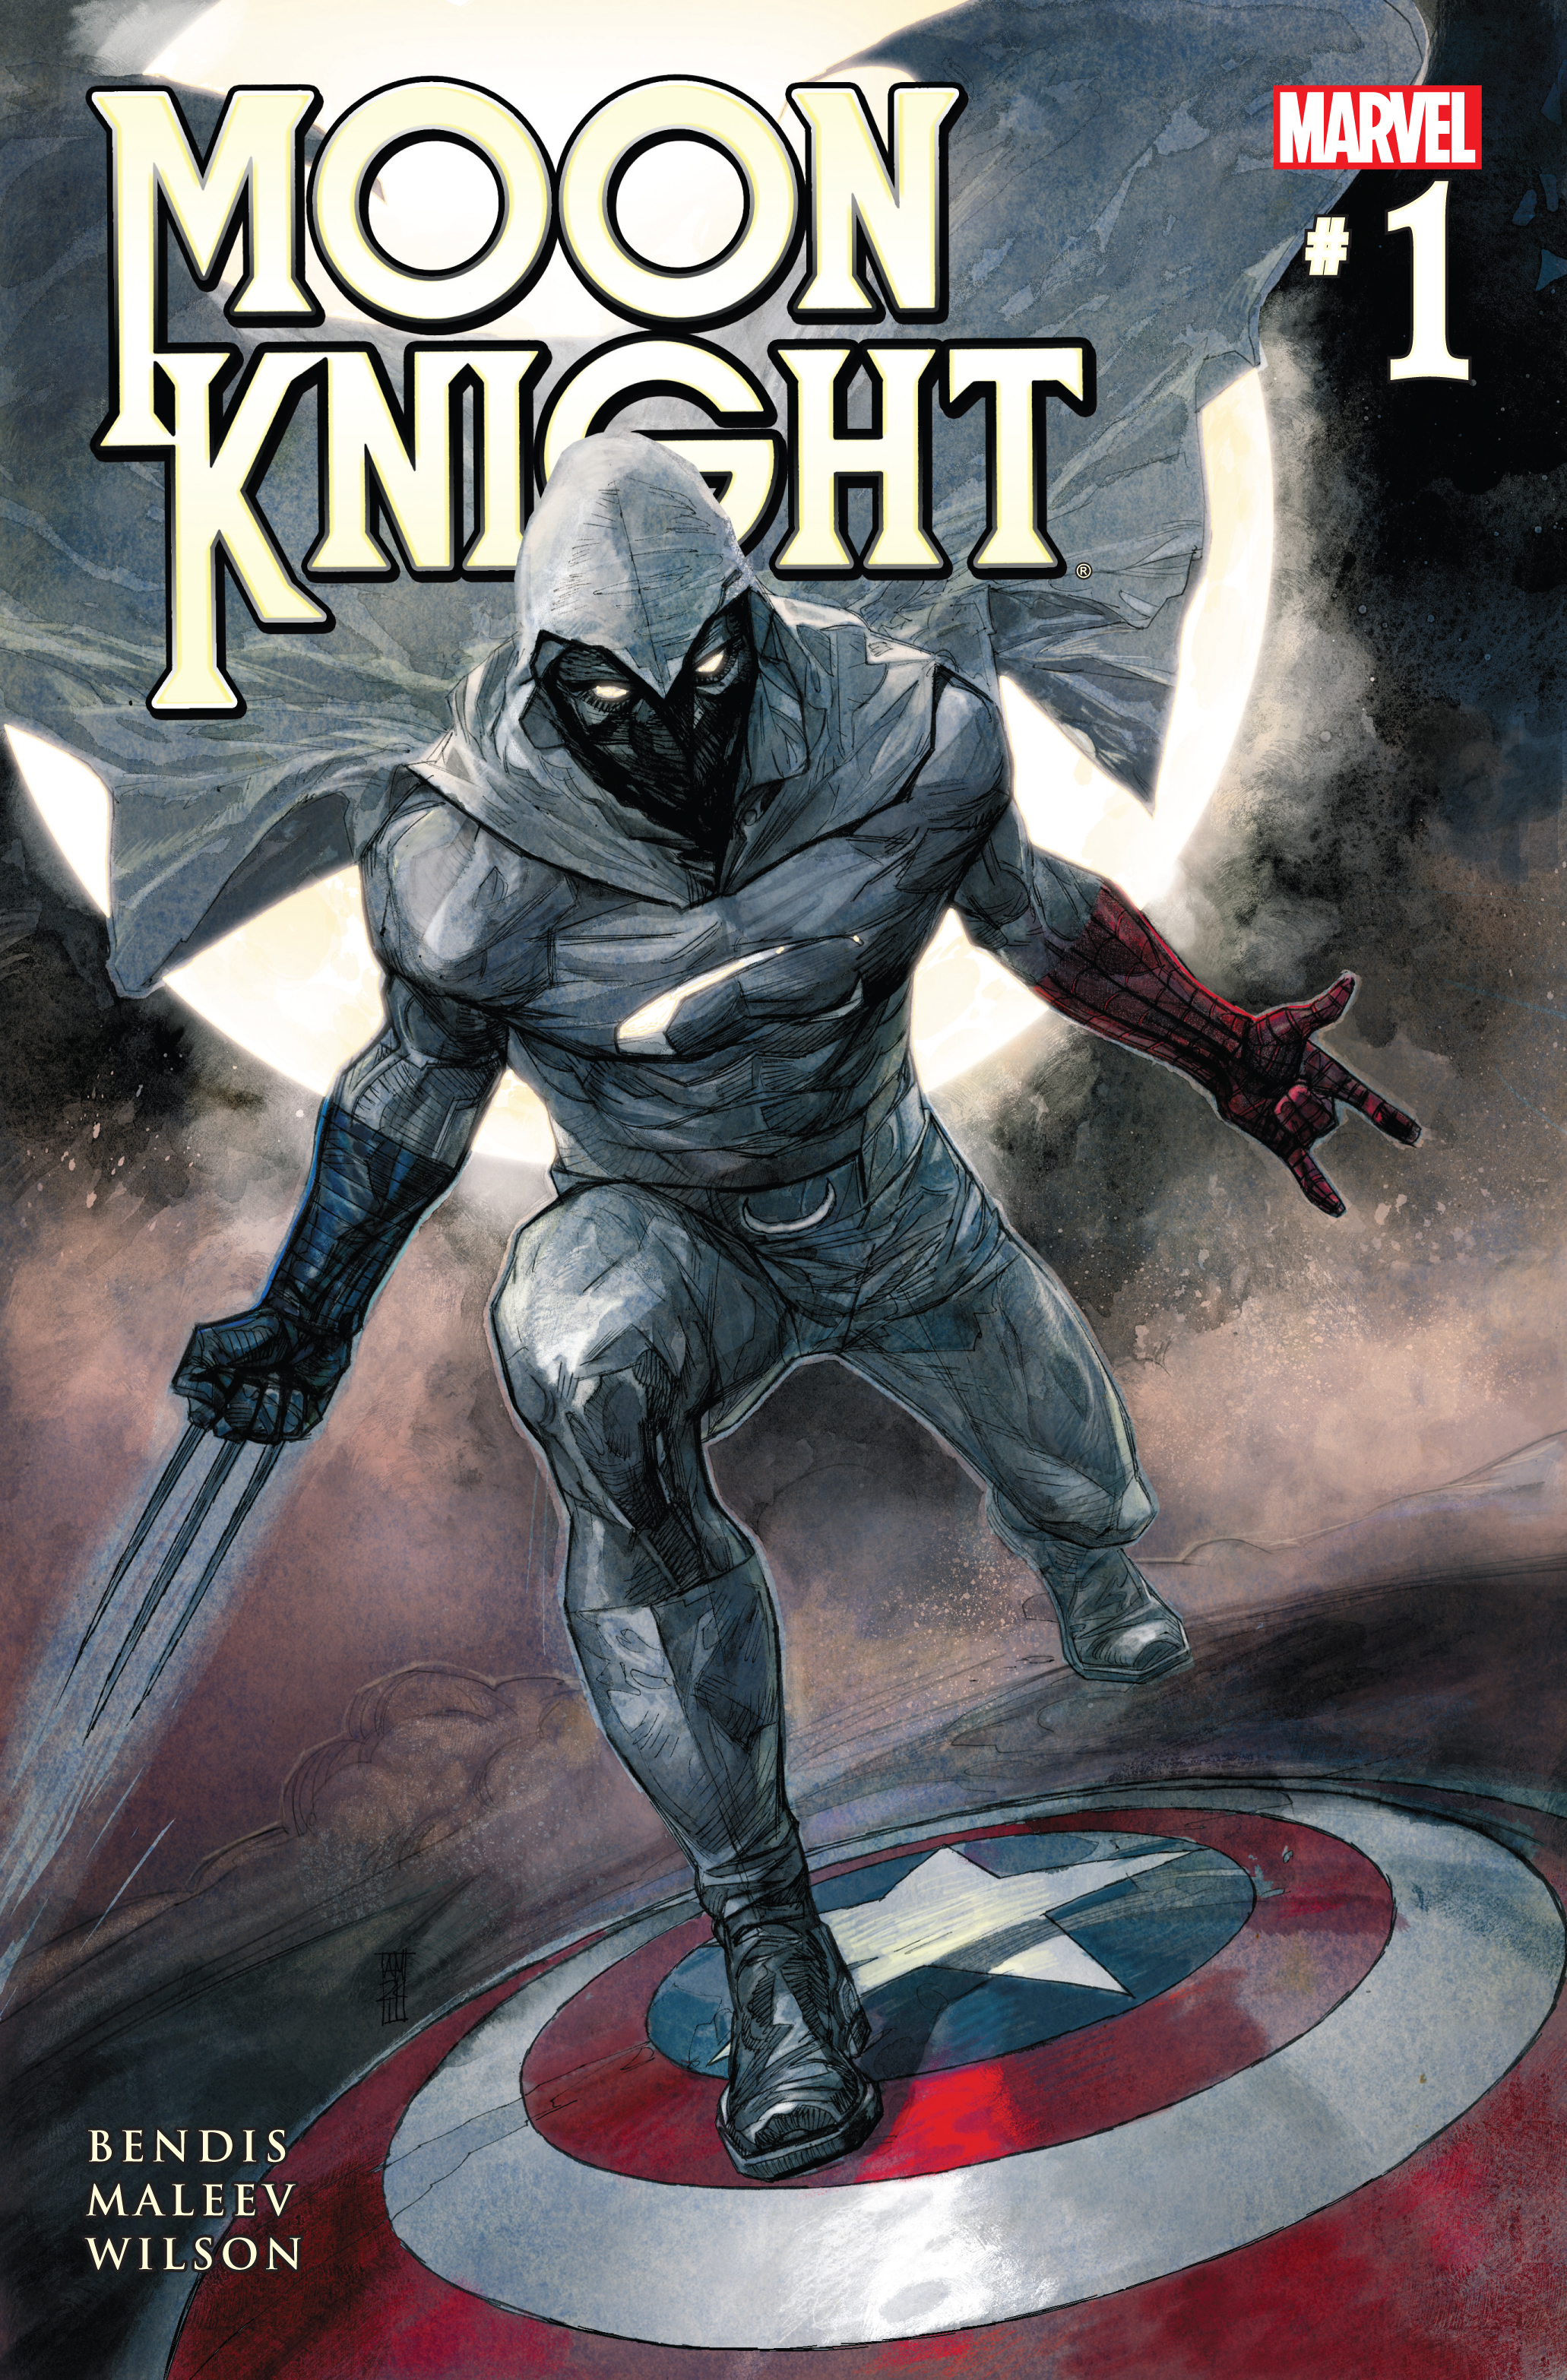 Who is moon knight